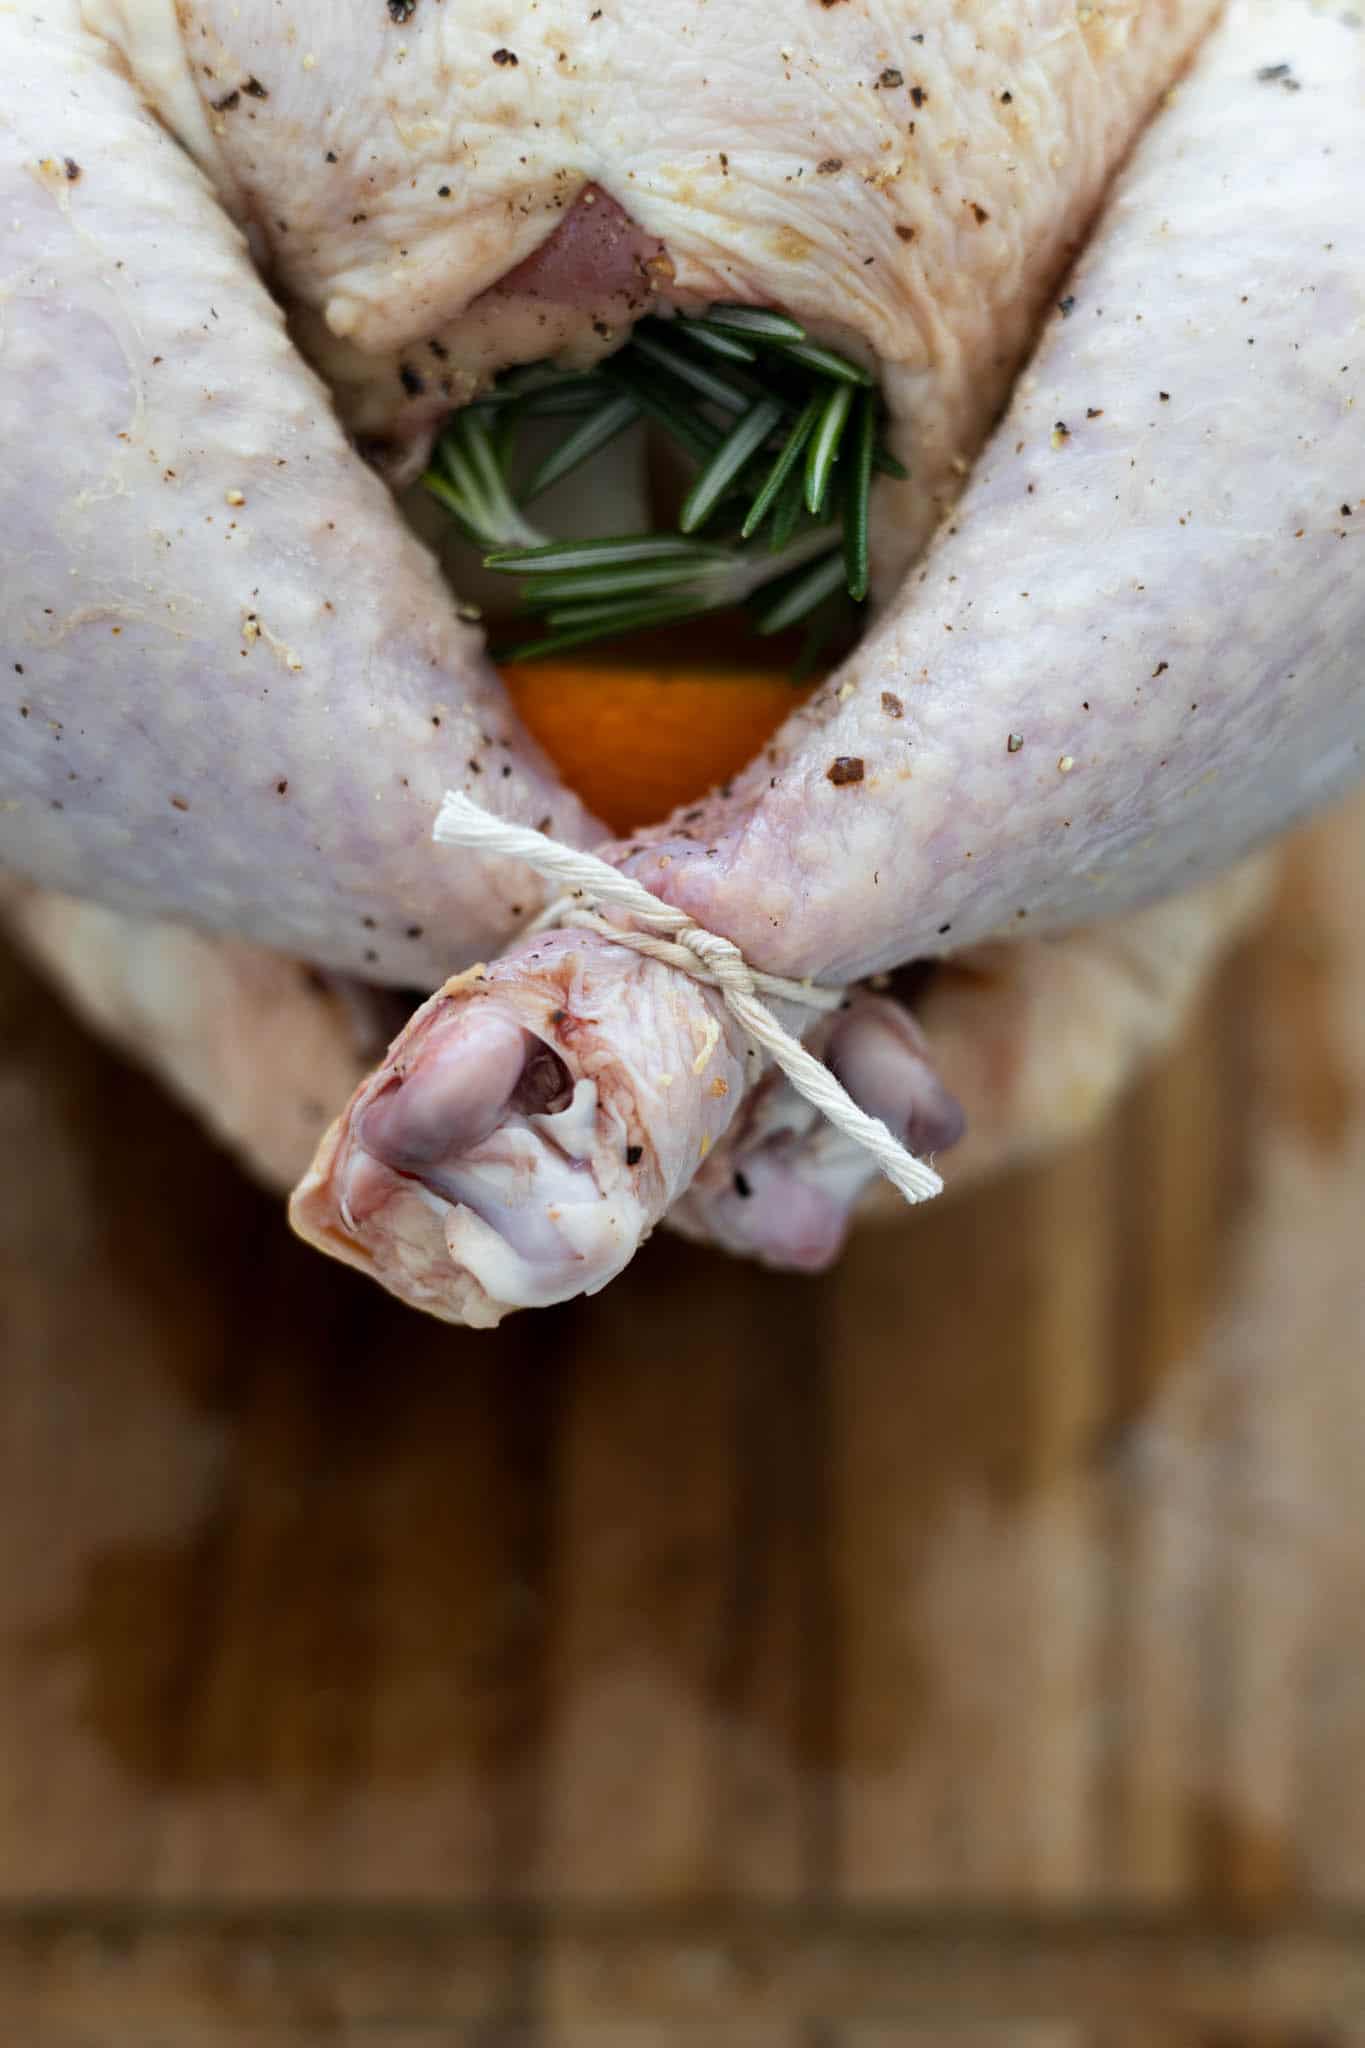 The tied legs of the stuffed chicken. 